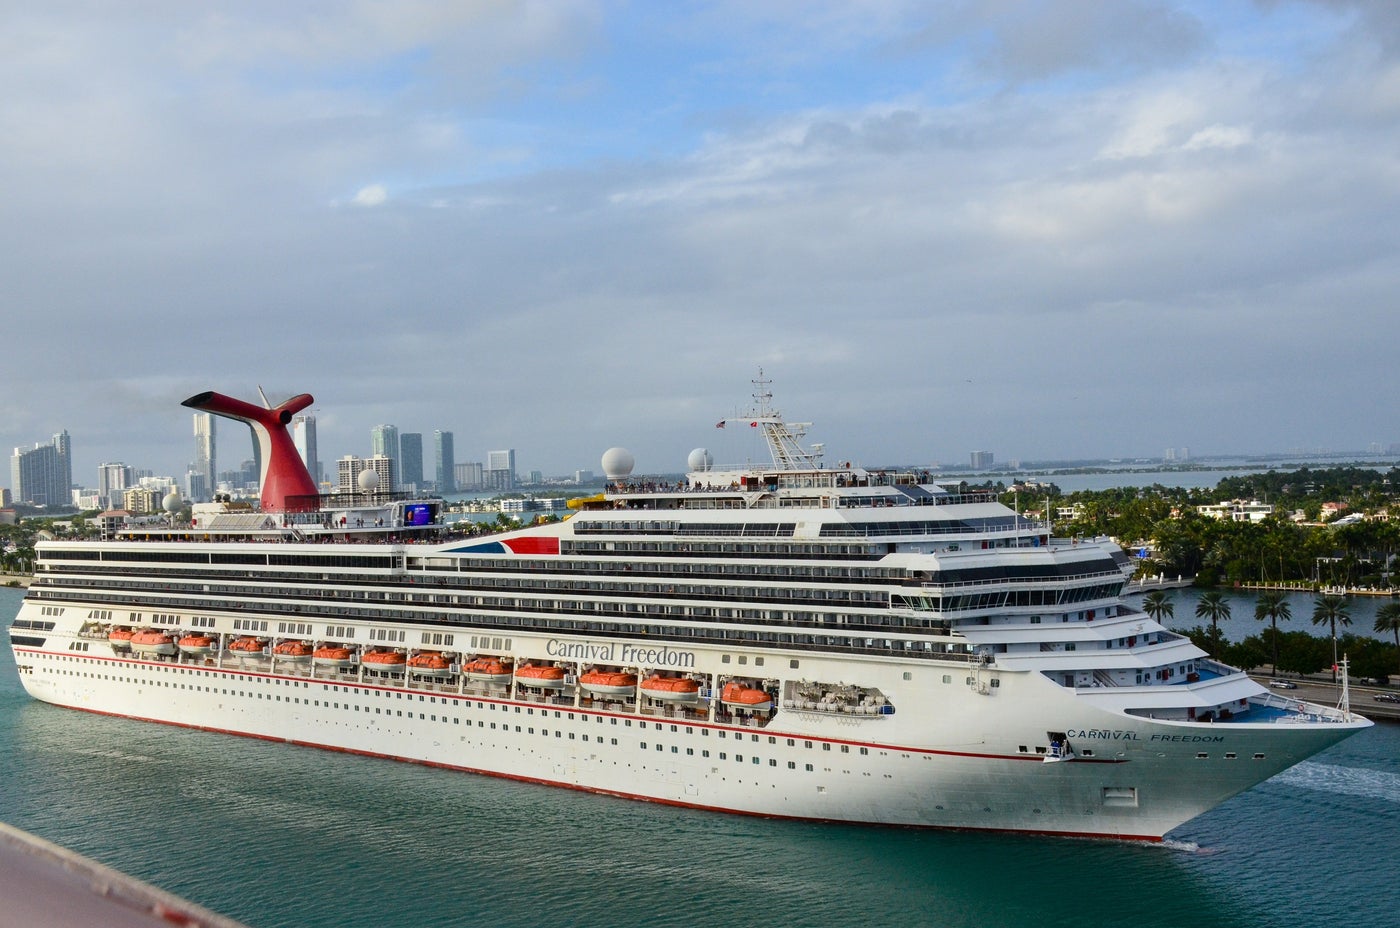 Fire Destroys Funnel On Carnival Cruise Ship; Sailings Canceled